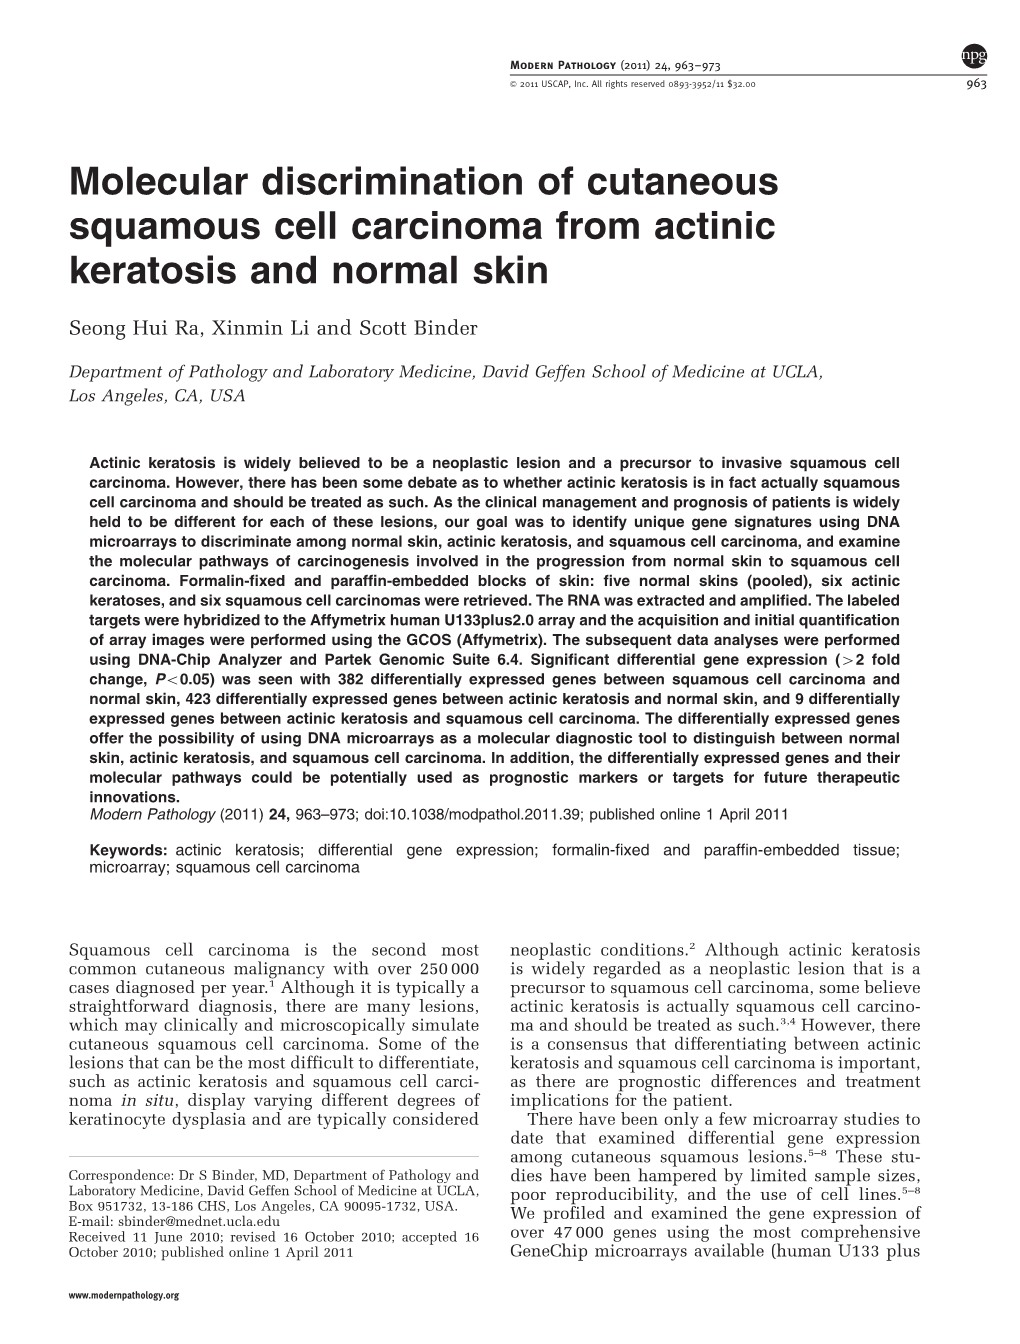 Molecular Discrimination of Cutaneous Squamous Cell Carcinoma from Actinic Keratosis and Normal Skin